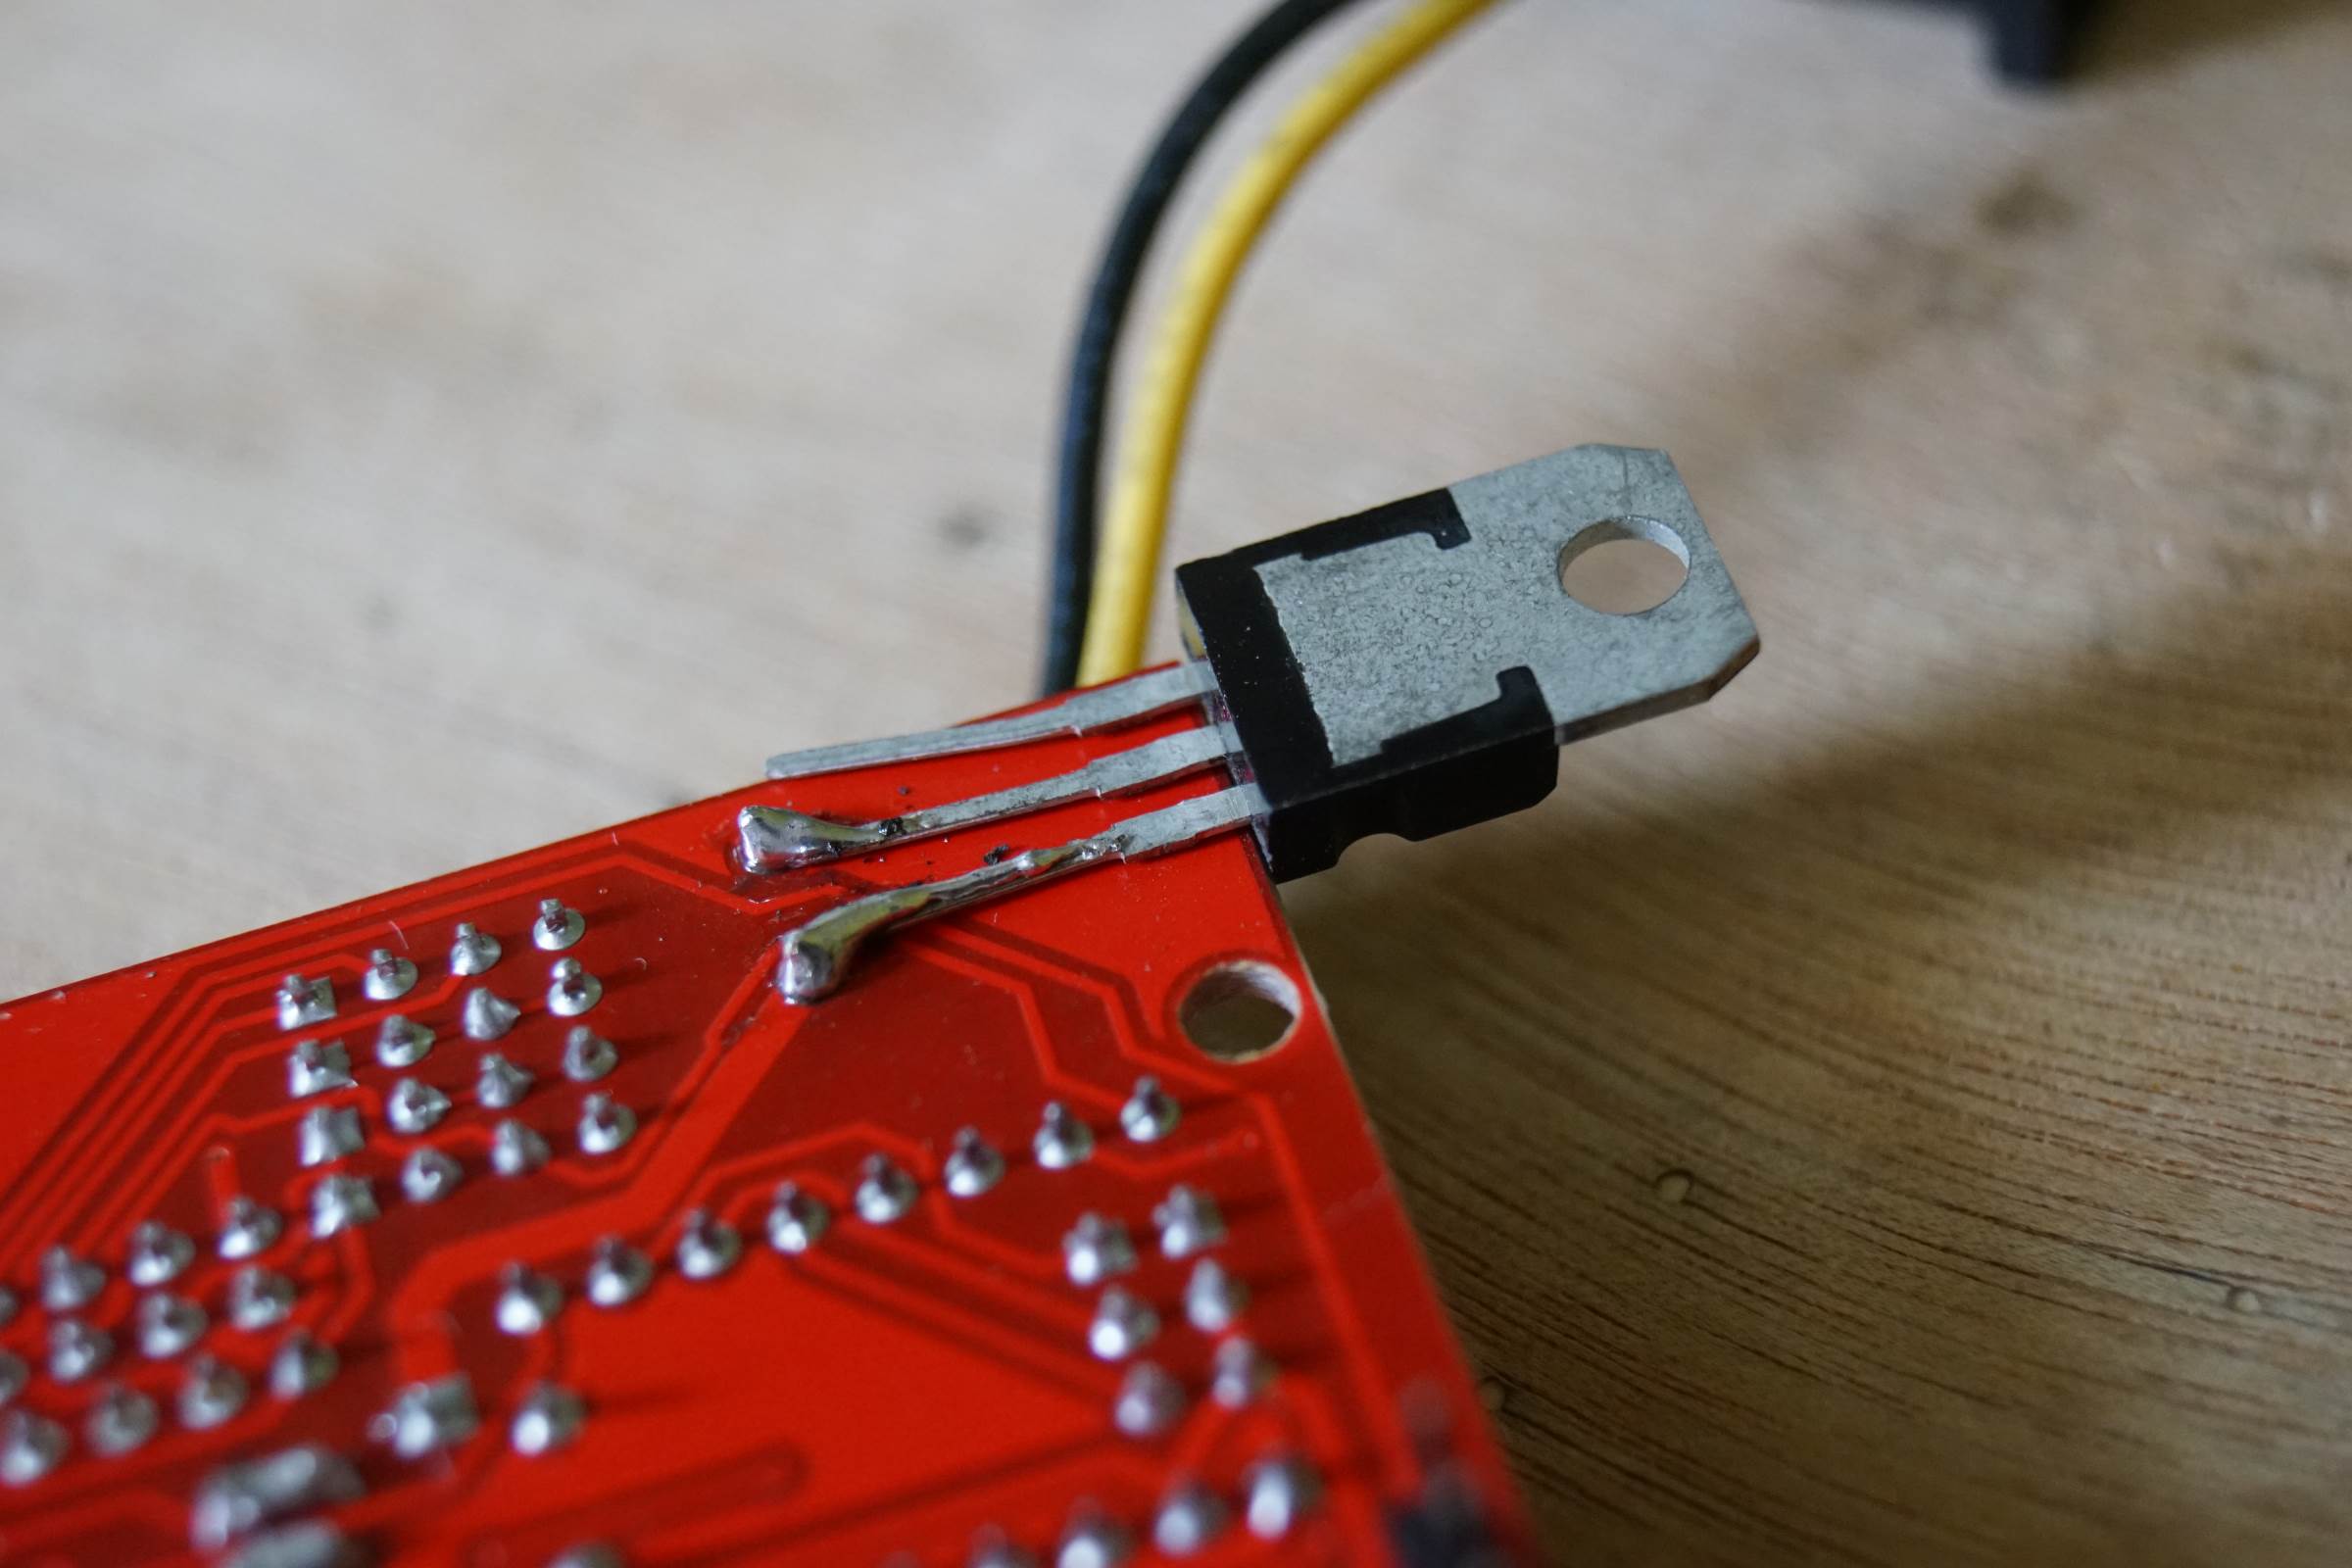 LM7806 Soldered Directly on 12 Input to Provide 6V for Micro Servo